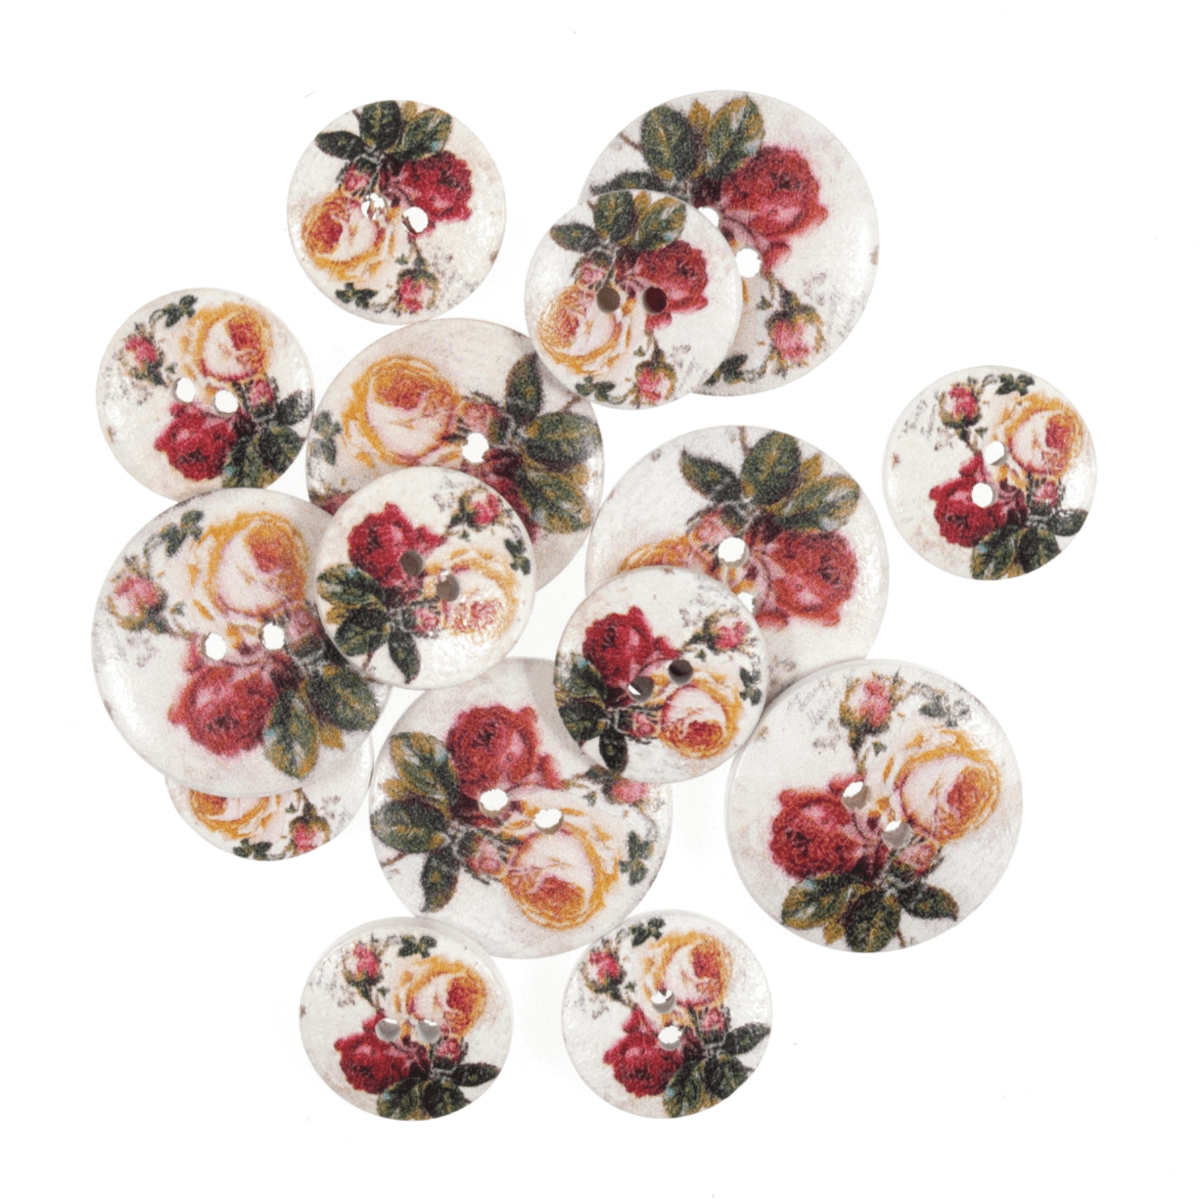 15 x Assorted Violet Peach Rose Wooden Craft Buttons 18mm - 25mm 